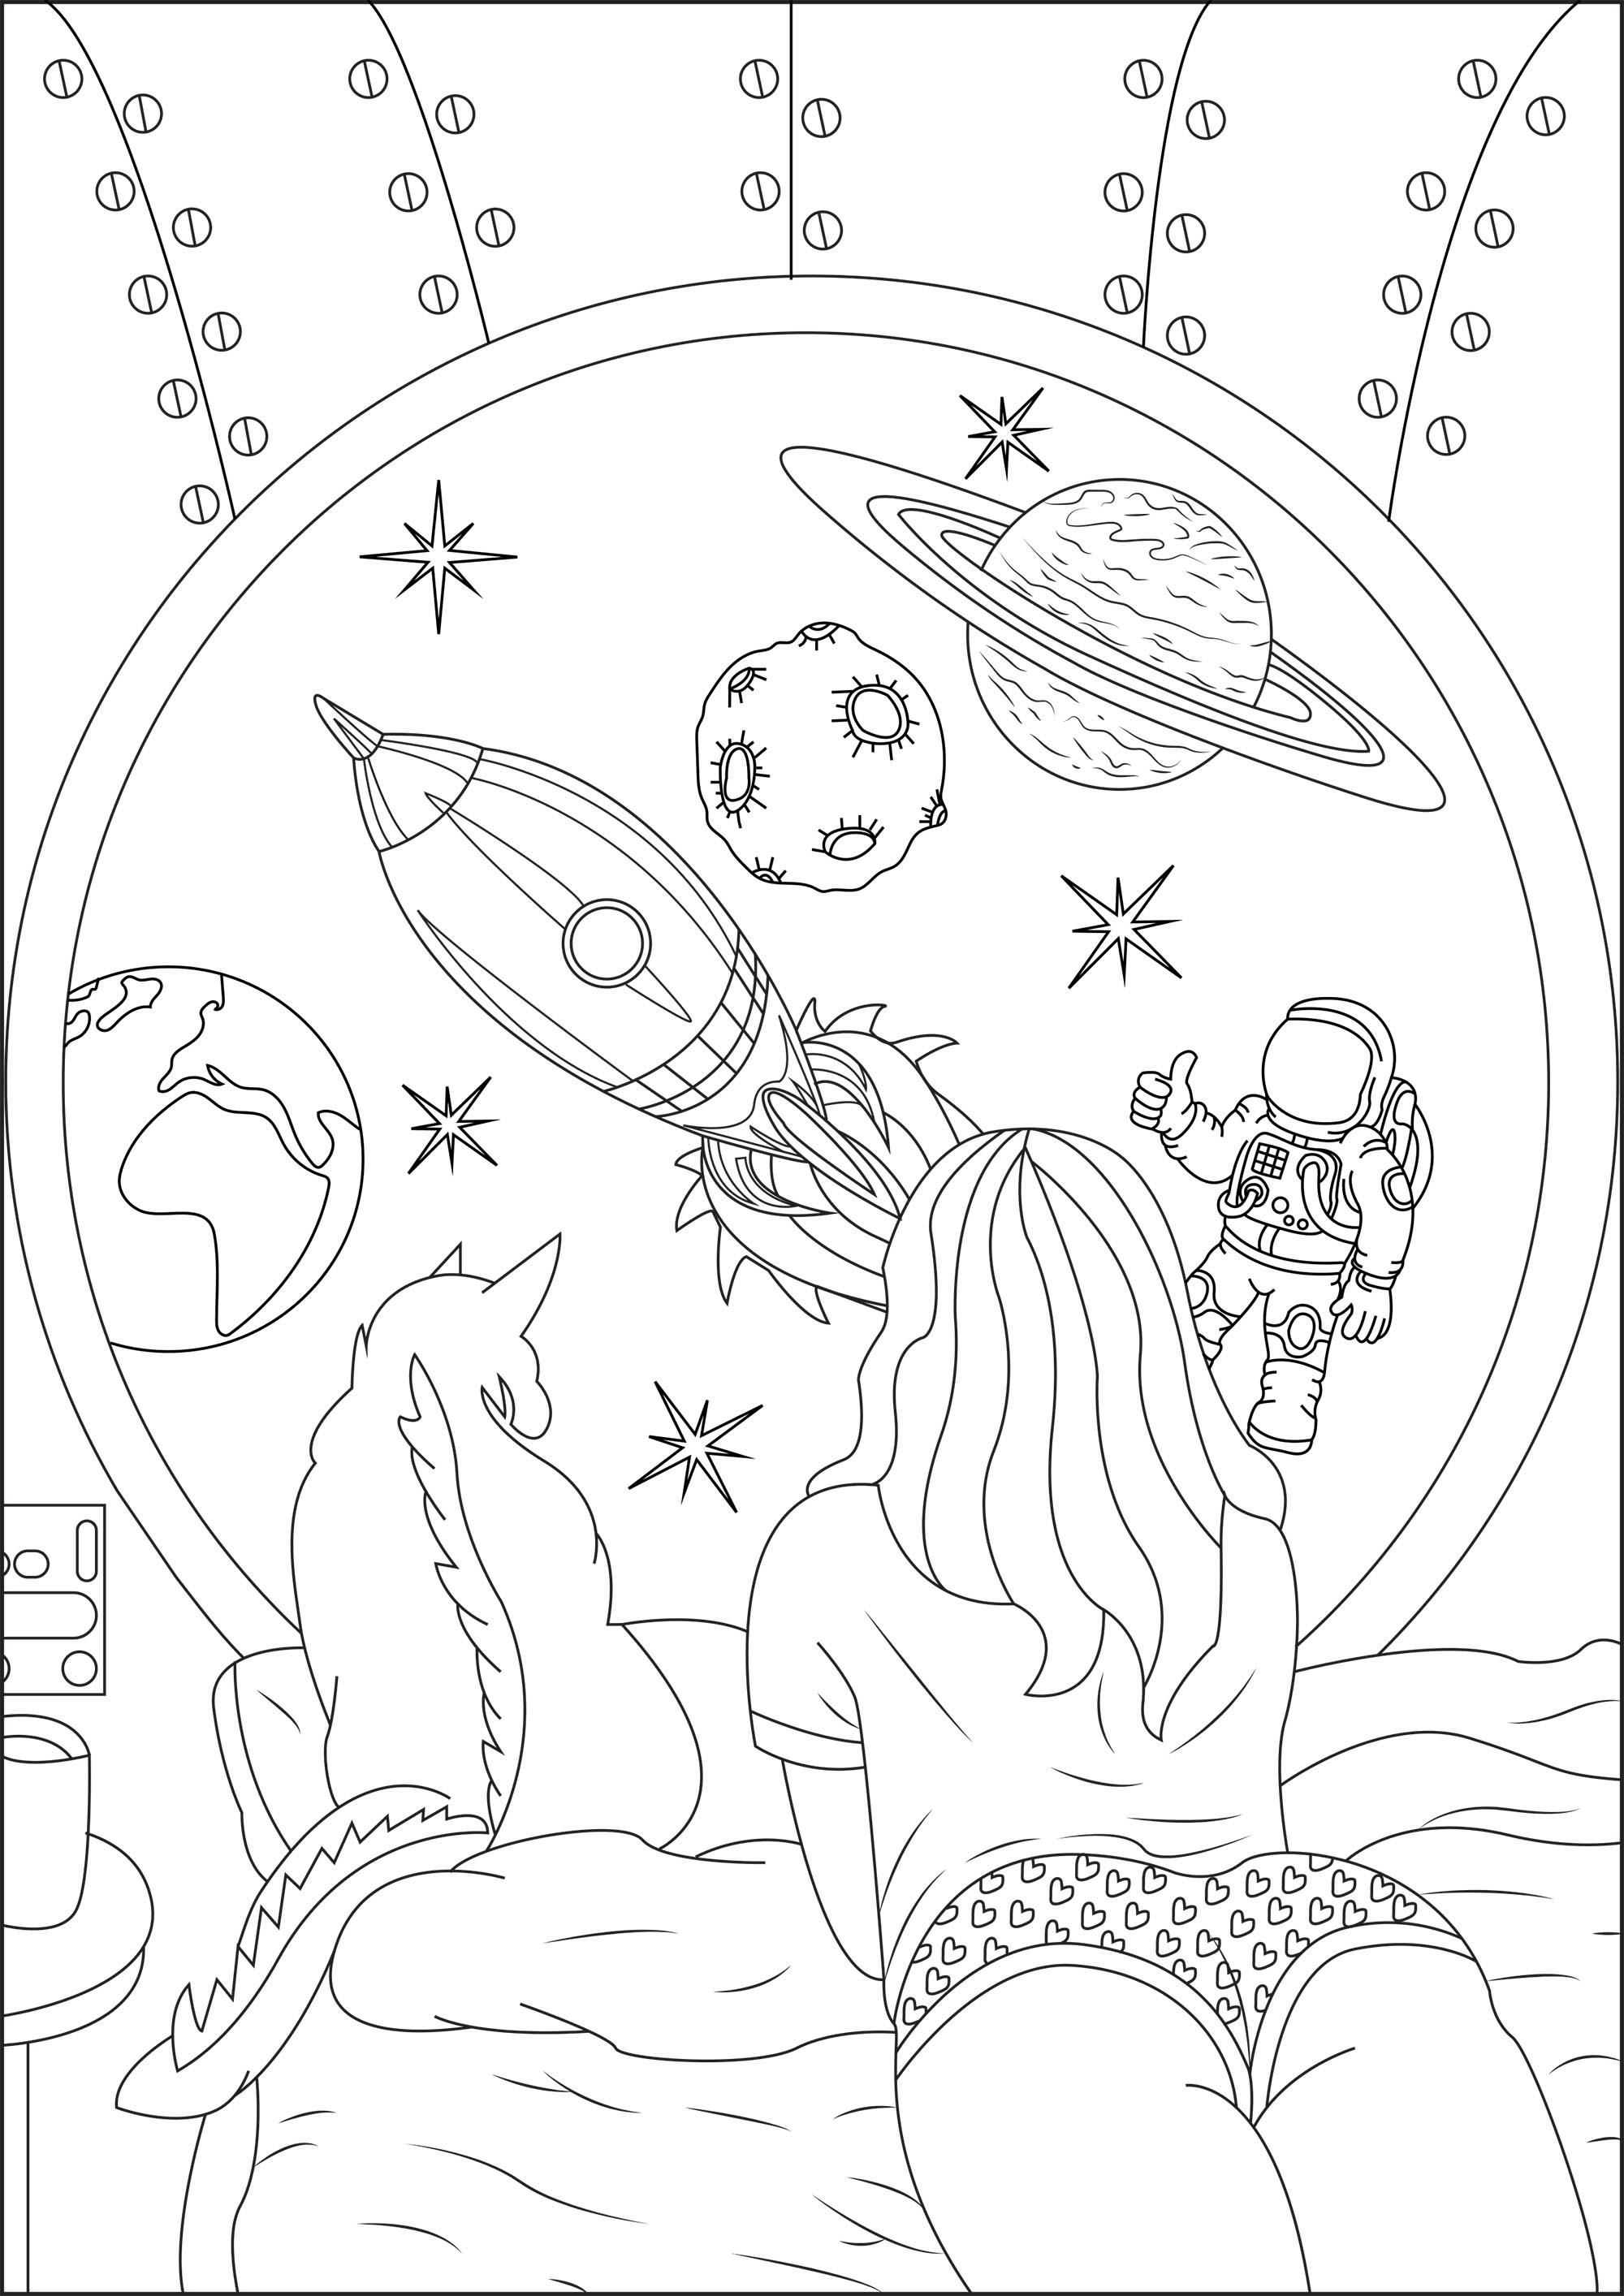 Girl dreaming of space travel with her cat. Through the porthole of her shuttle, she sees: a rocket, the moon, the Earth, an asteroid, Saturn, an Astronaut, and pretty, bright stars, Artist : Caillou